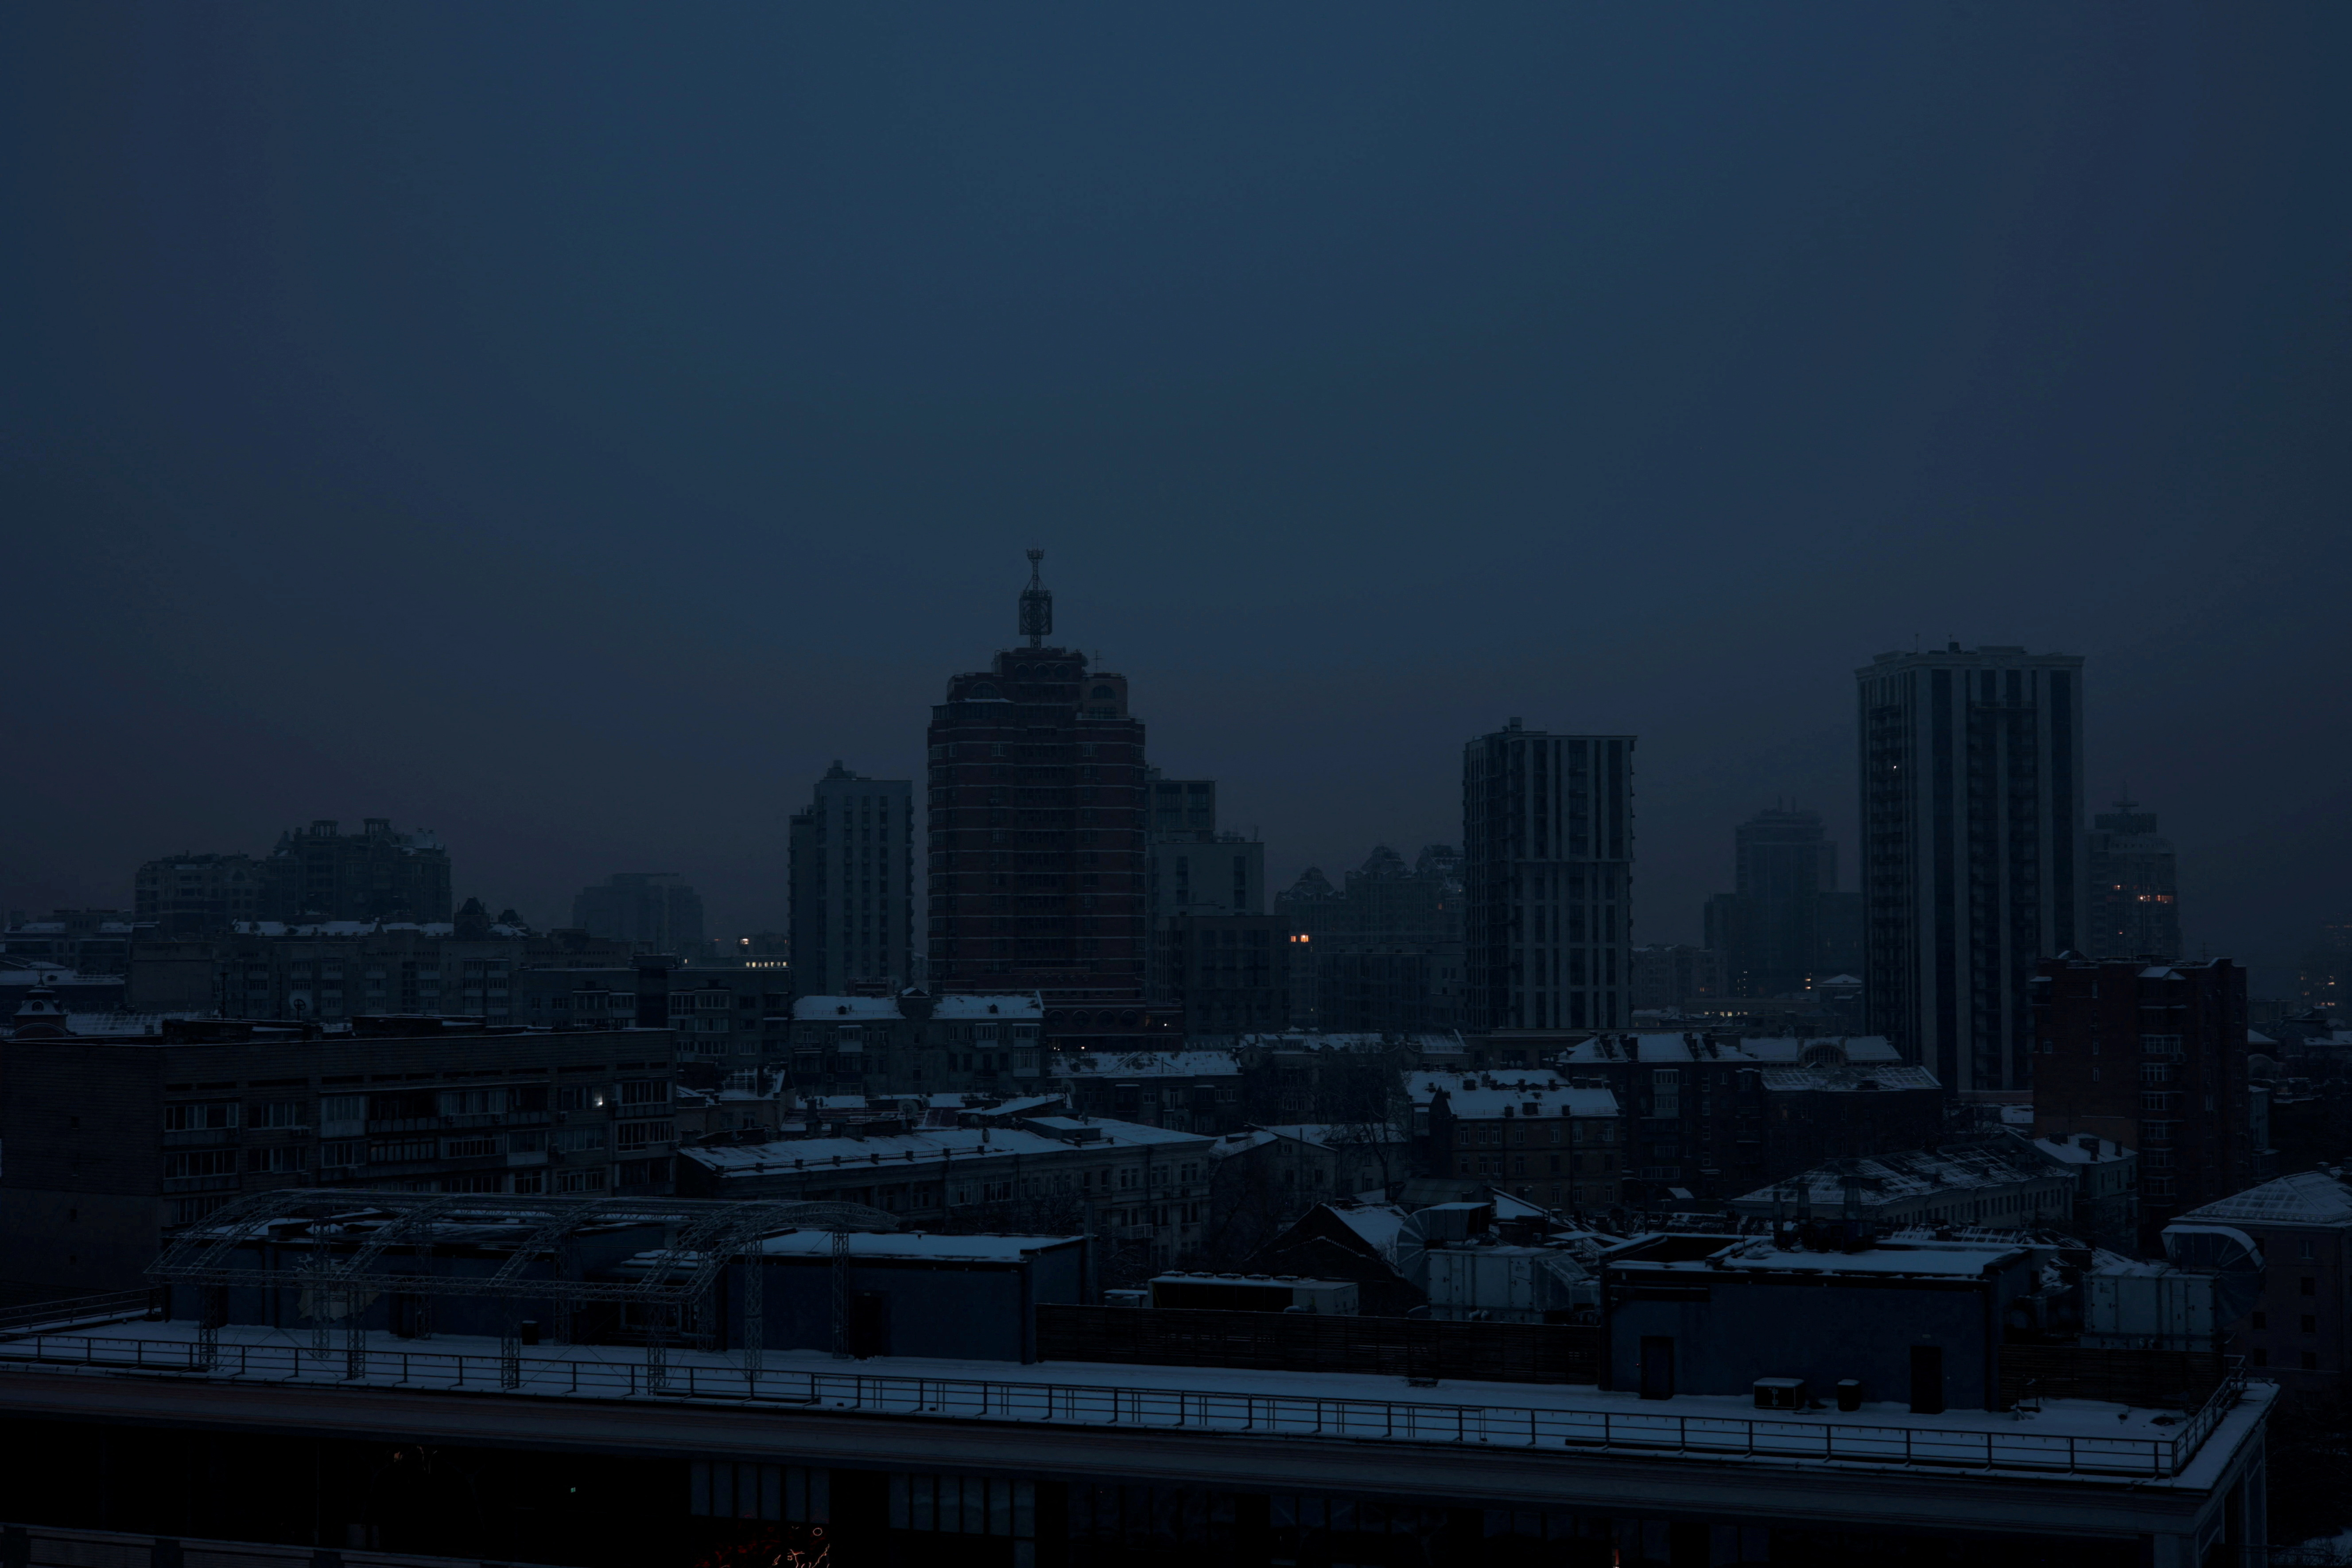 A view shows a city without electricity after key public buildings were hit by Russian missile attacks in Kyiv